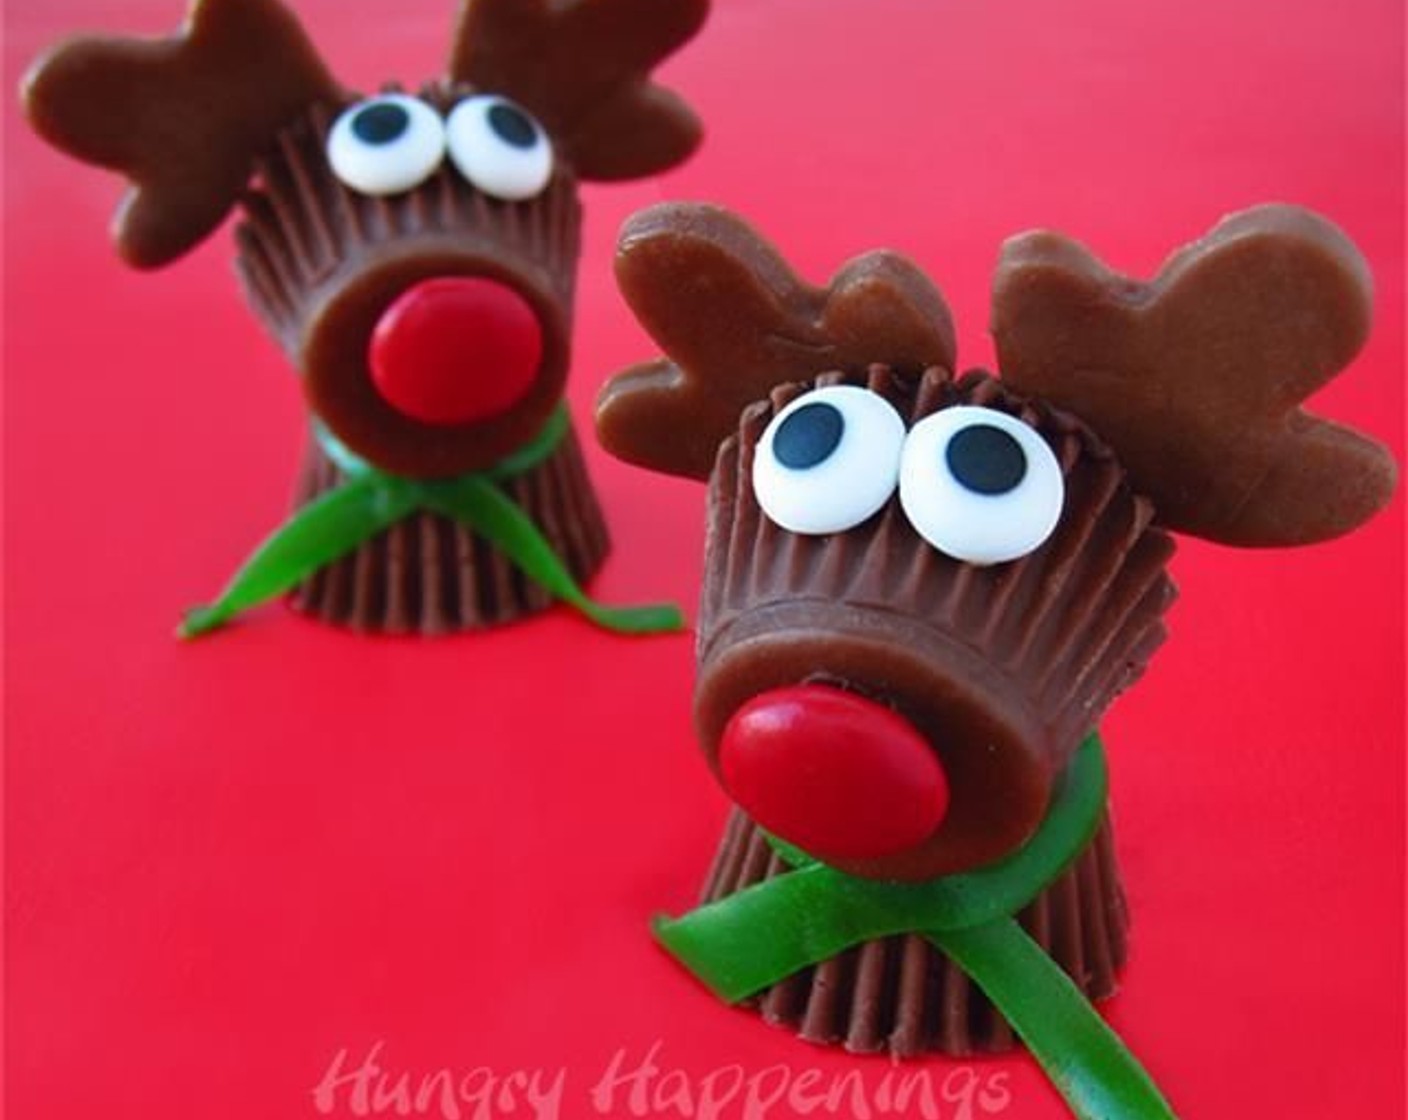 step 8 Surprise someone with these adorable festive treats!